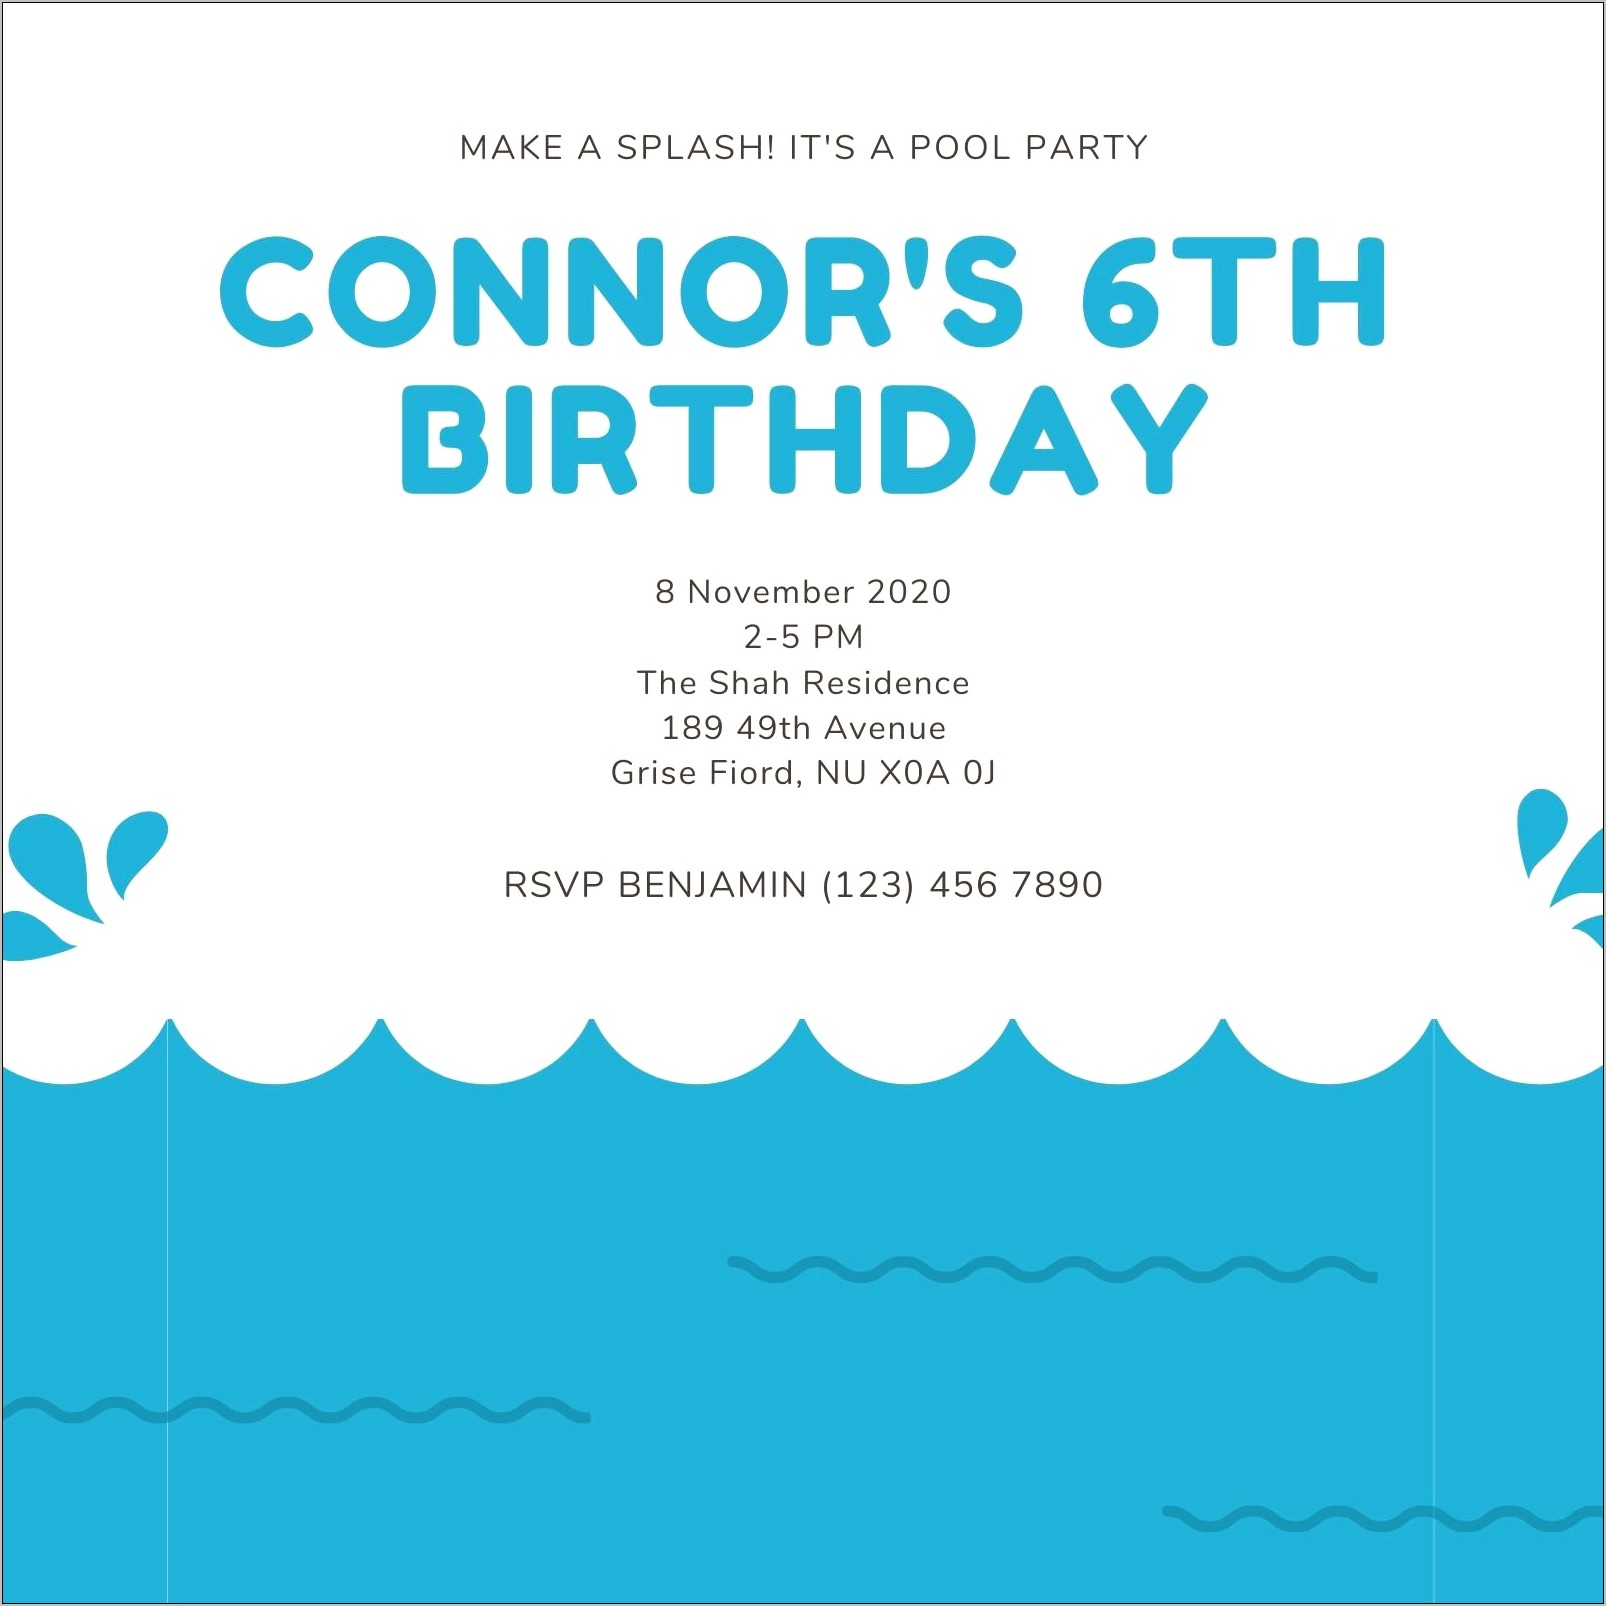 Hot Tub Party Invitation Template Free